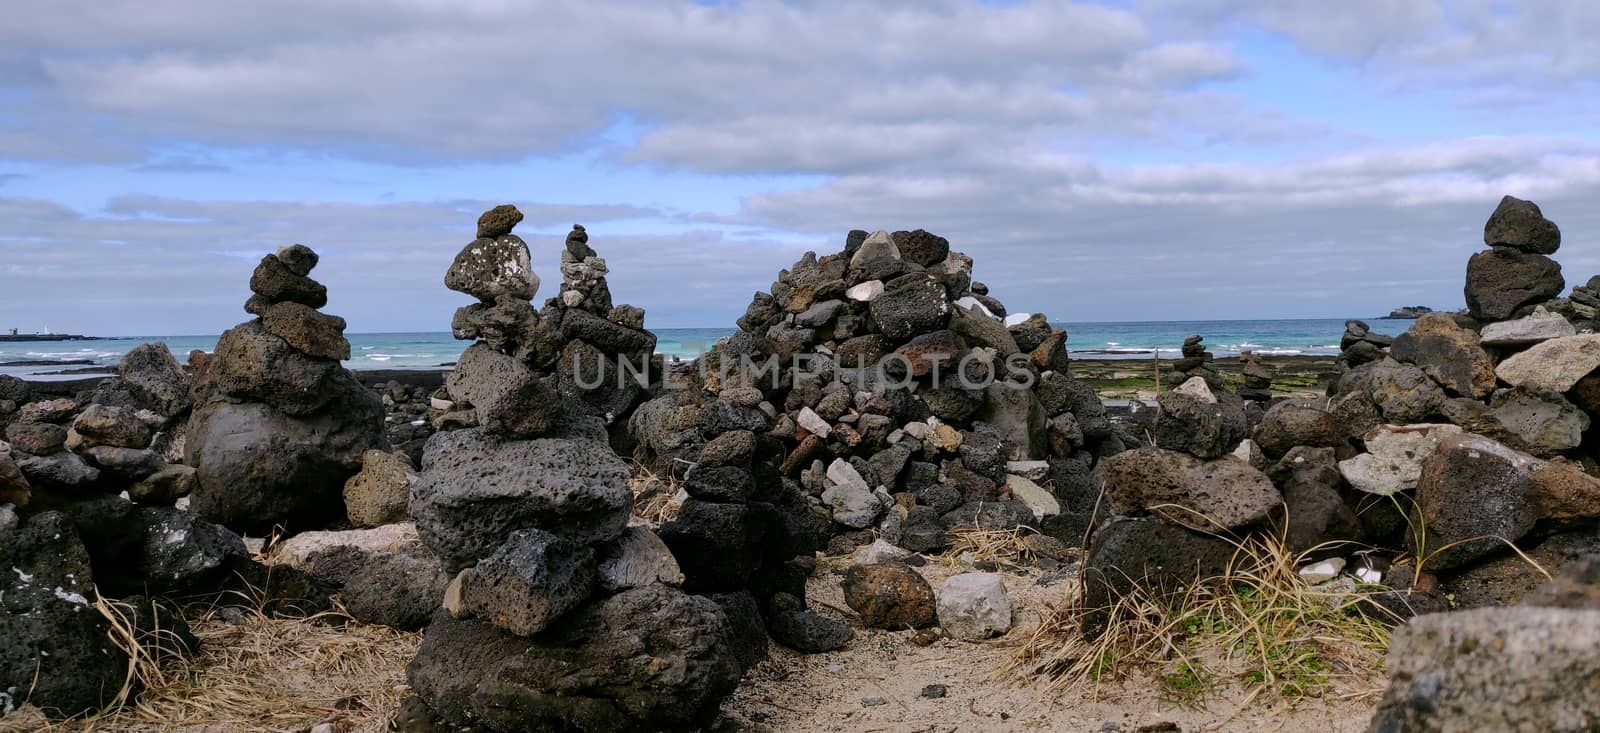 Wish rock blocks made by people on the shore of a beach by mshivangi92